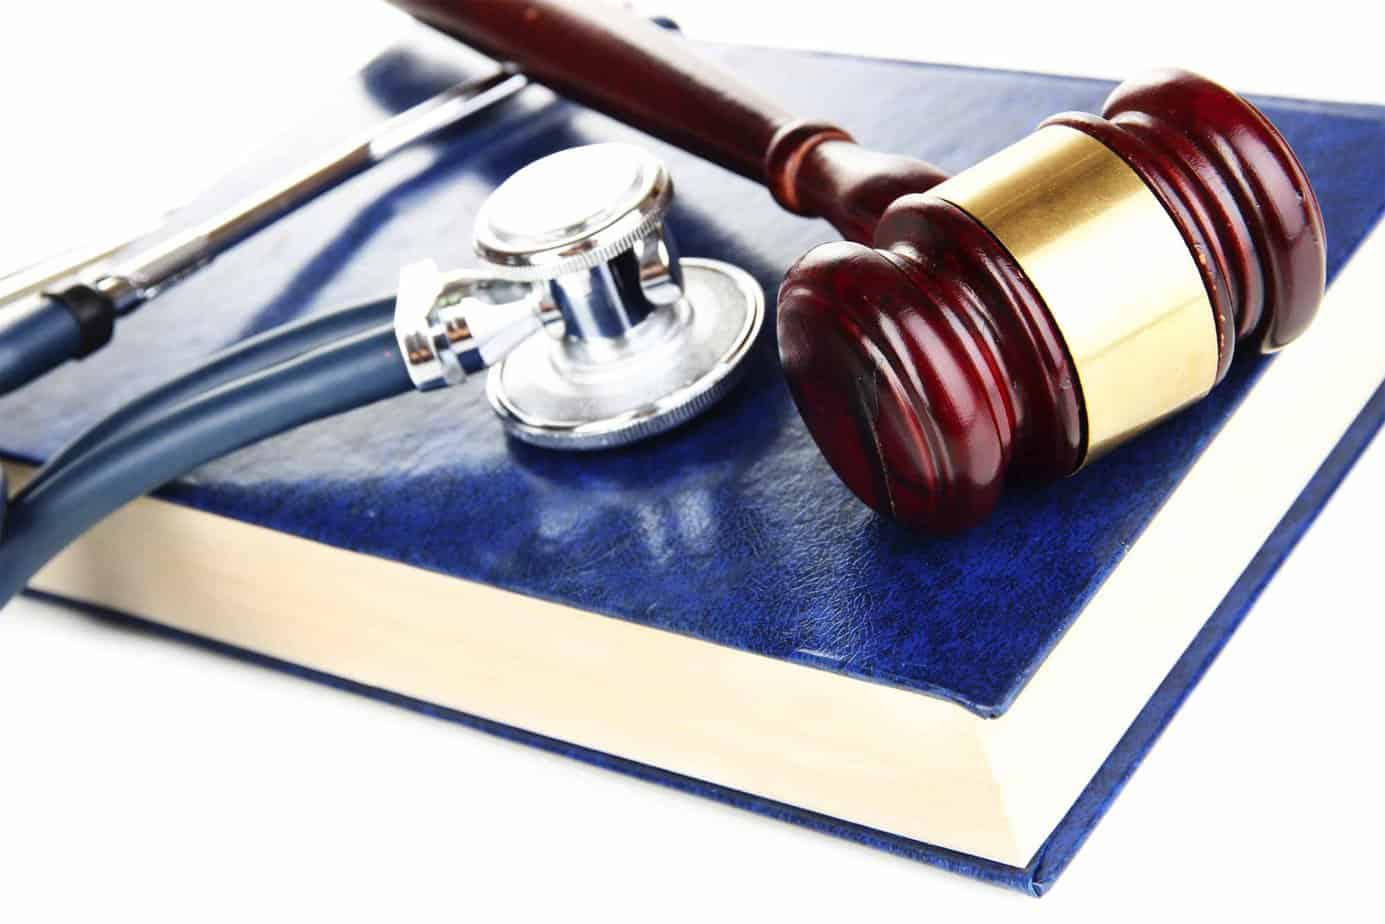 Gavel and stethoscope on blue book